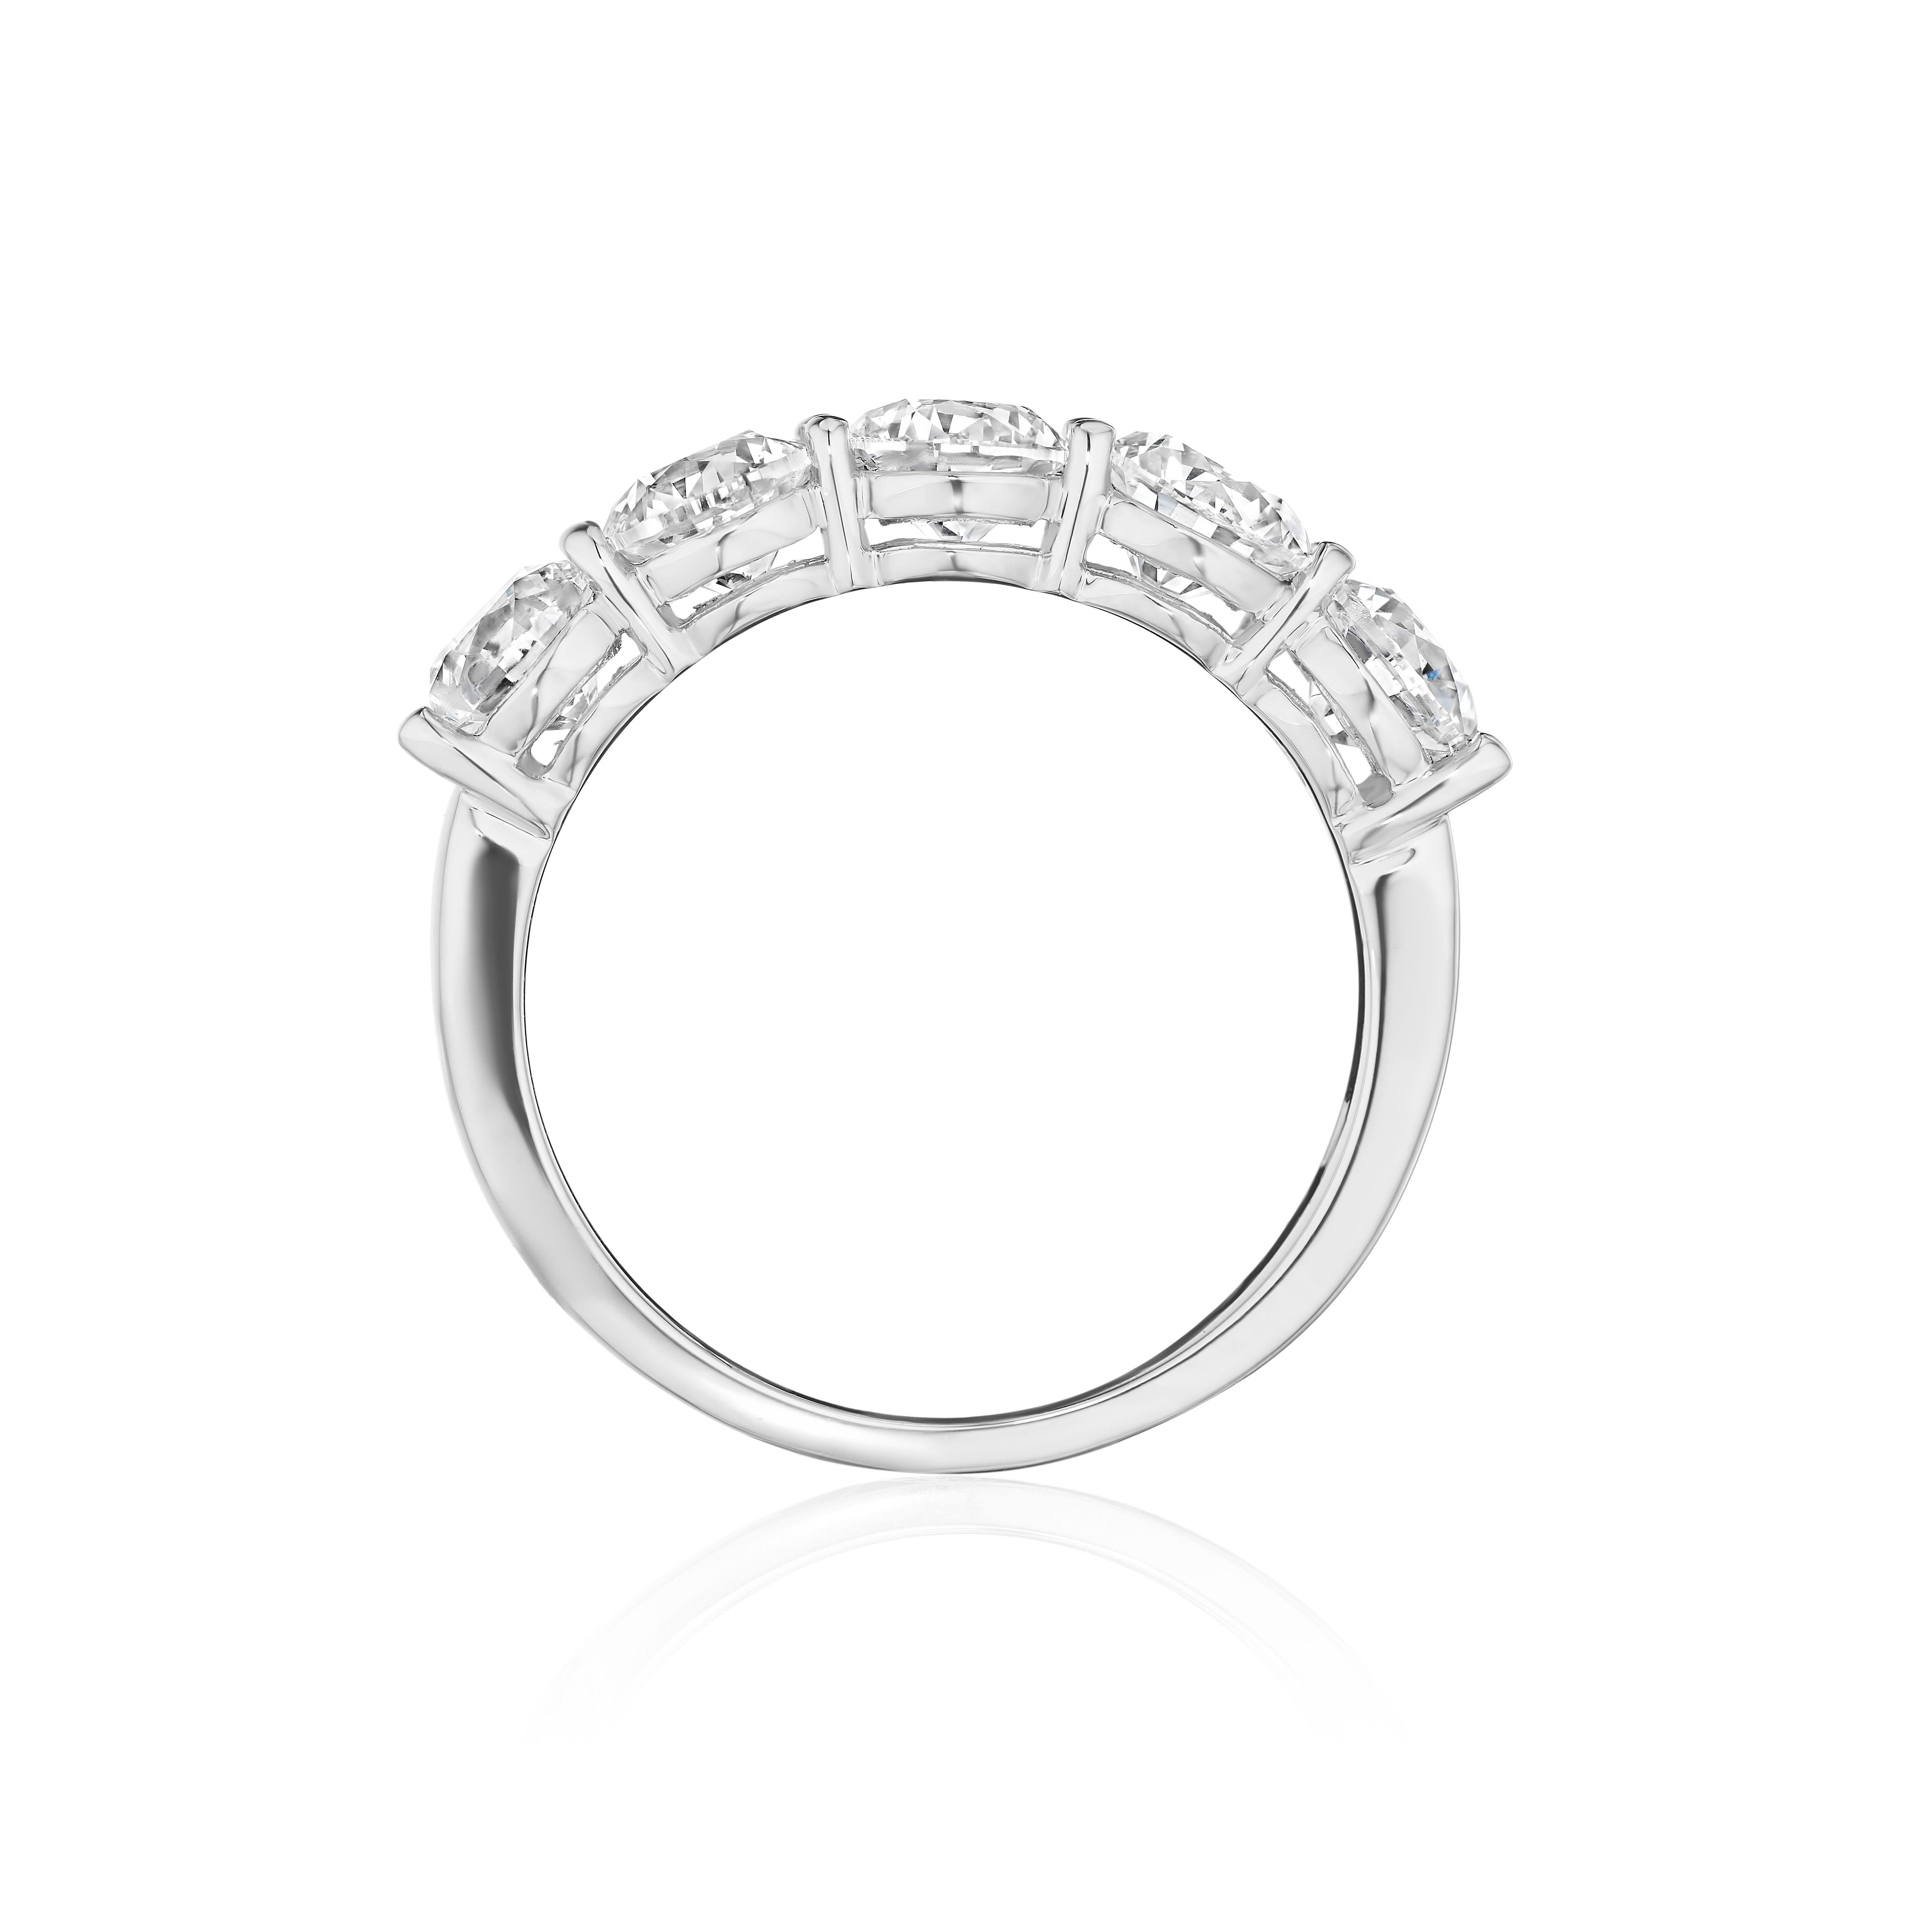 • Crafted in 18KT gold, this band is made with 5 round brilliant cut diamonds, and has a combining total weight of approximately 2.50 carats. The diamonds are set into a shared prong setting. Worn beautifully on its own or stacked. A beautiful and